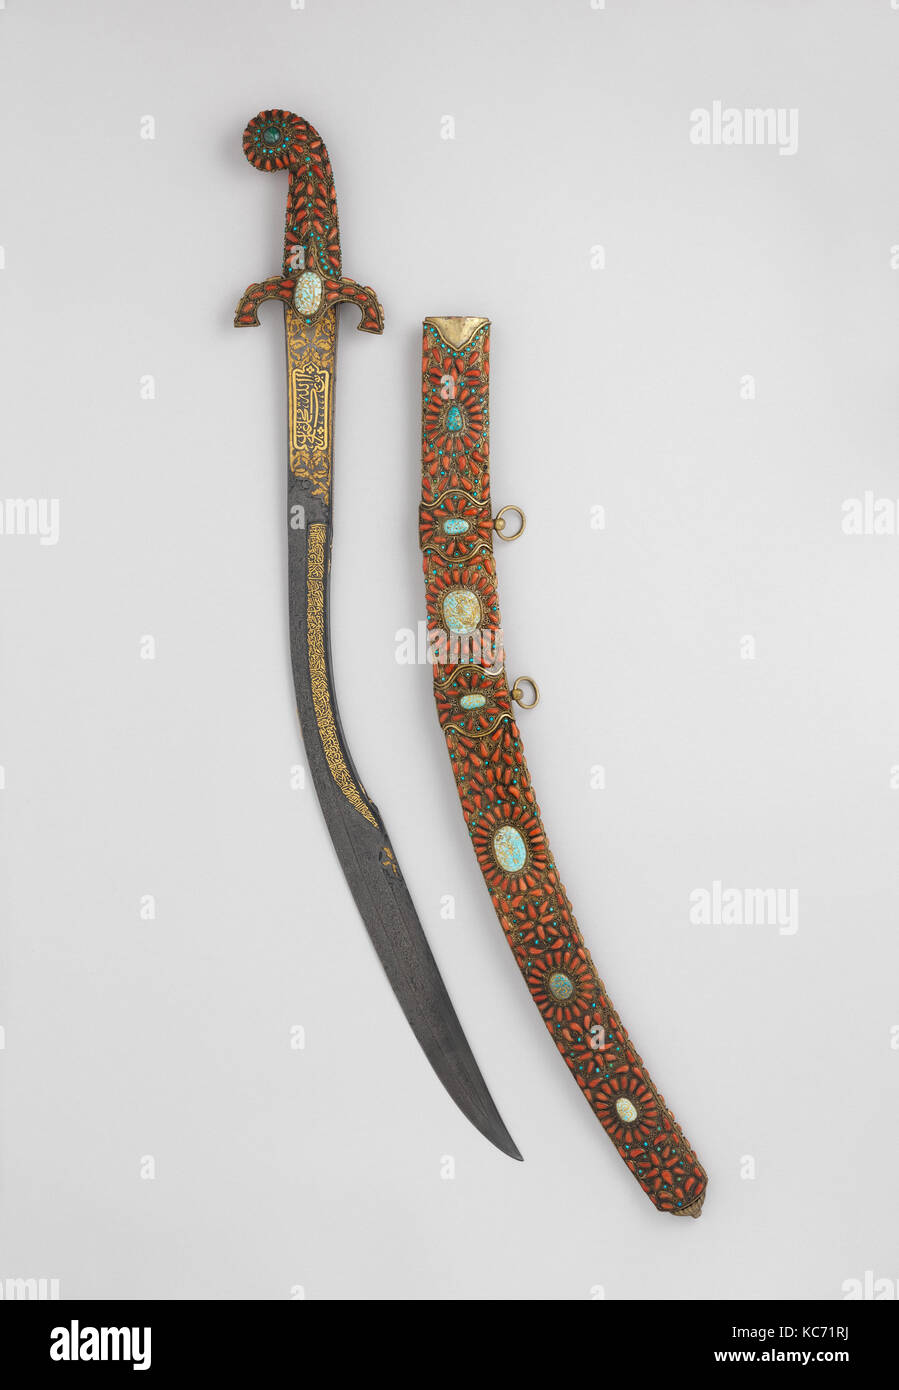 Sword (Kilij) with Scabbard, 19th century, Turkish, Steel, wood, turquoise, coral, emerald, gold, L. 35 1/2 in. (90.2 cm), Sword Stock Photo